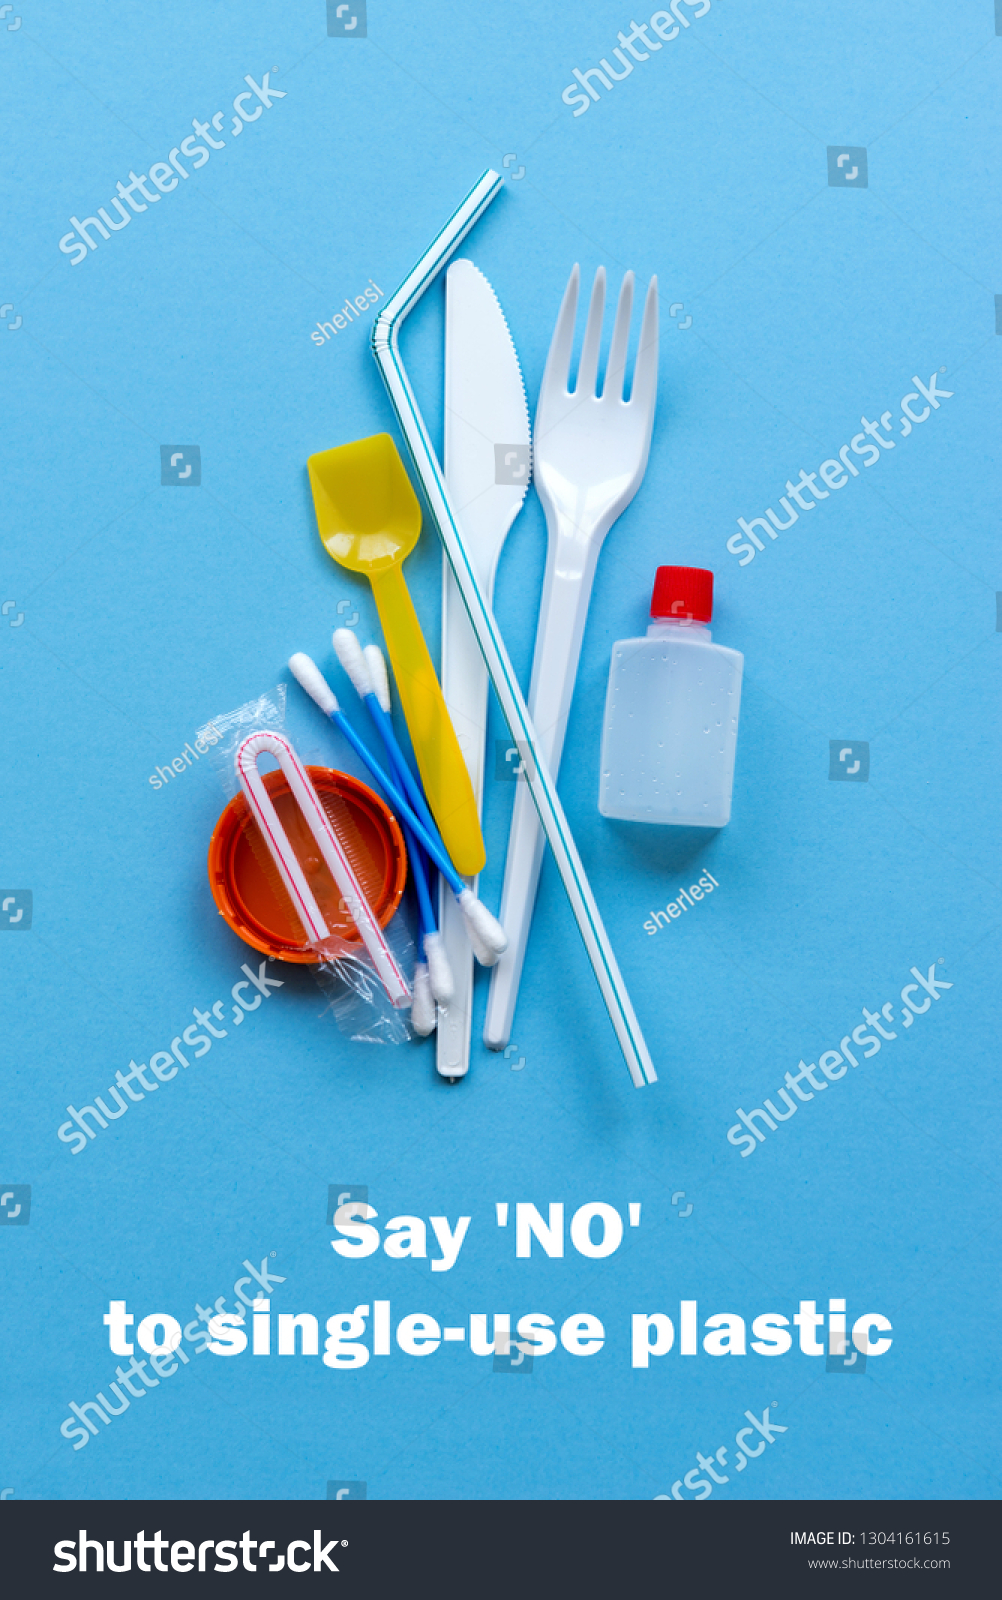 White single-use plastic and plastic drink straws on a blue background. Say no to single use plastic. Environmental, pollution concept. #1304161615